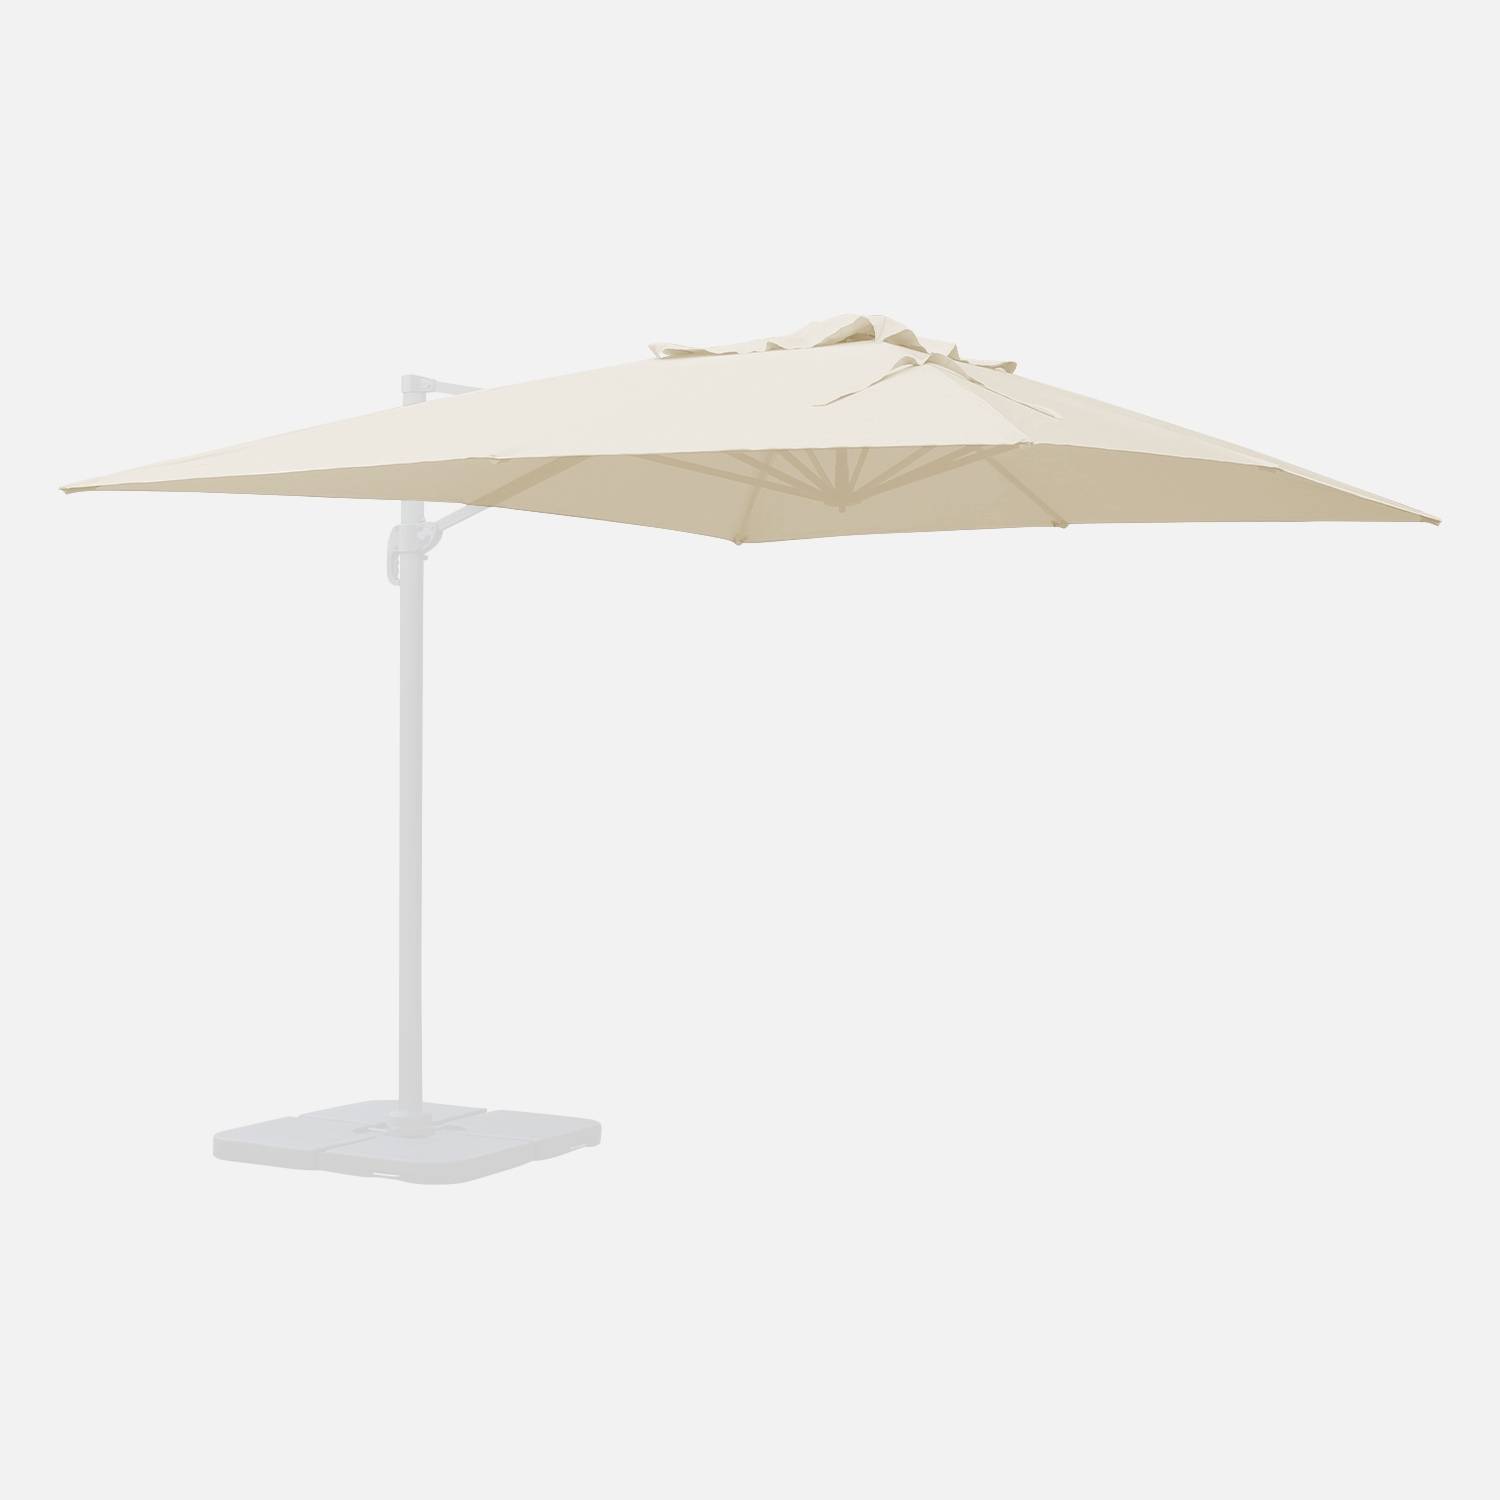 Off-white 3x4m canopy for the St Jean de Luz parasol, replacement canopy | sweeek